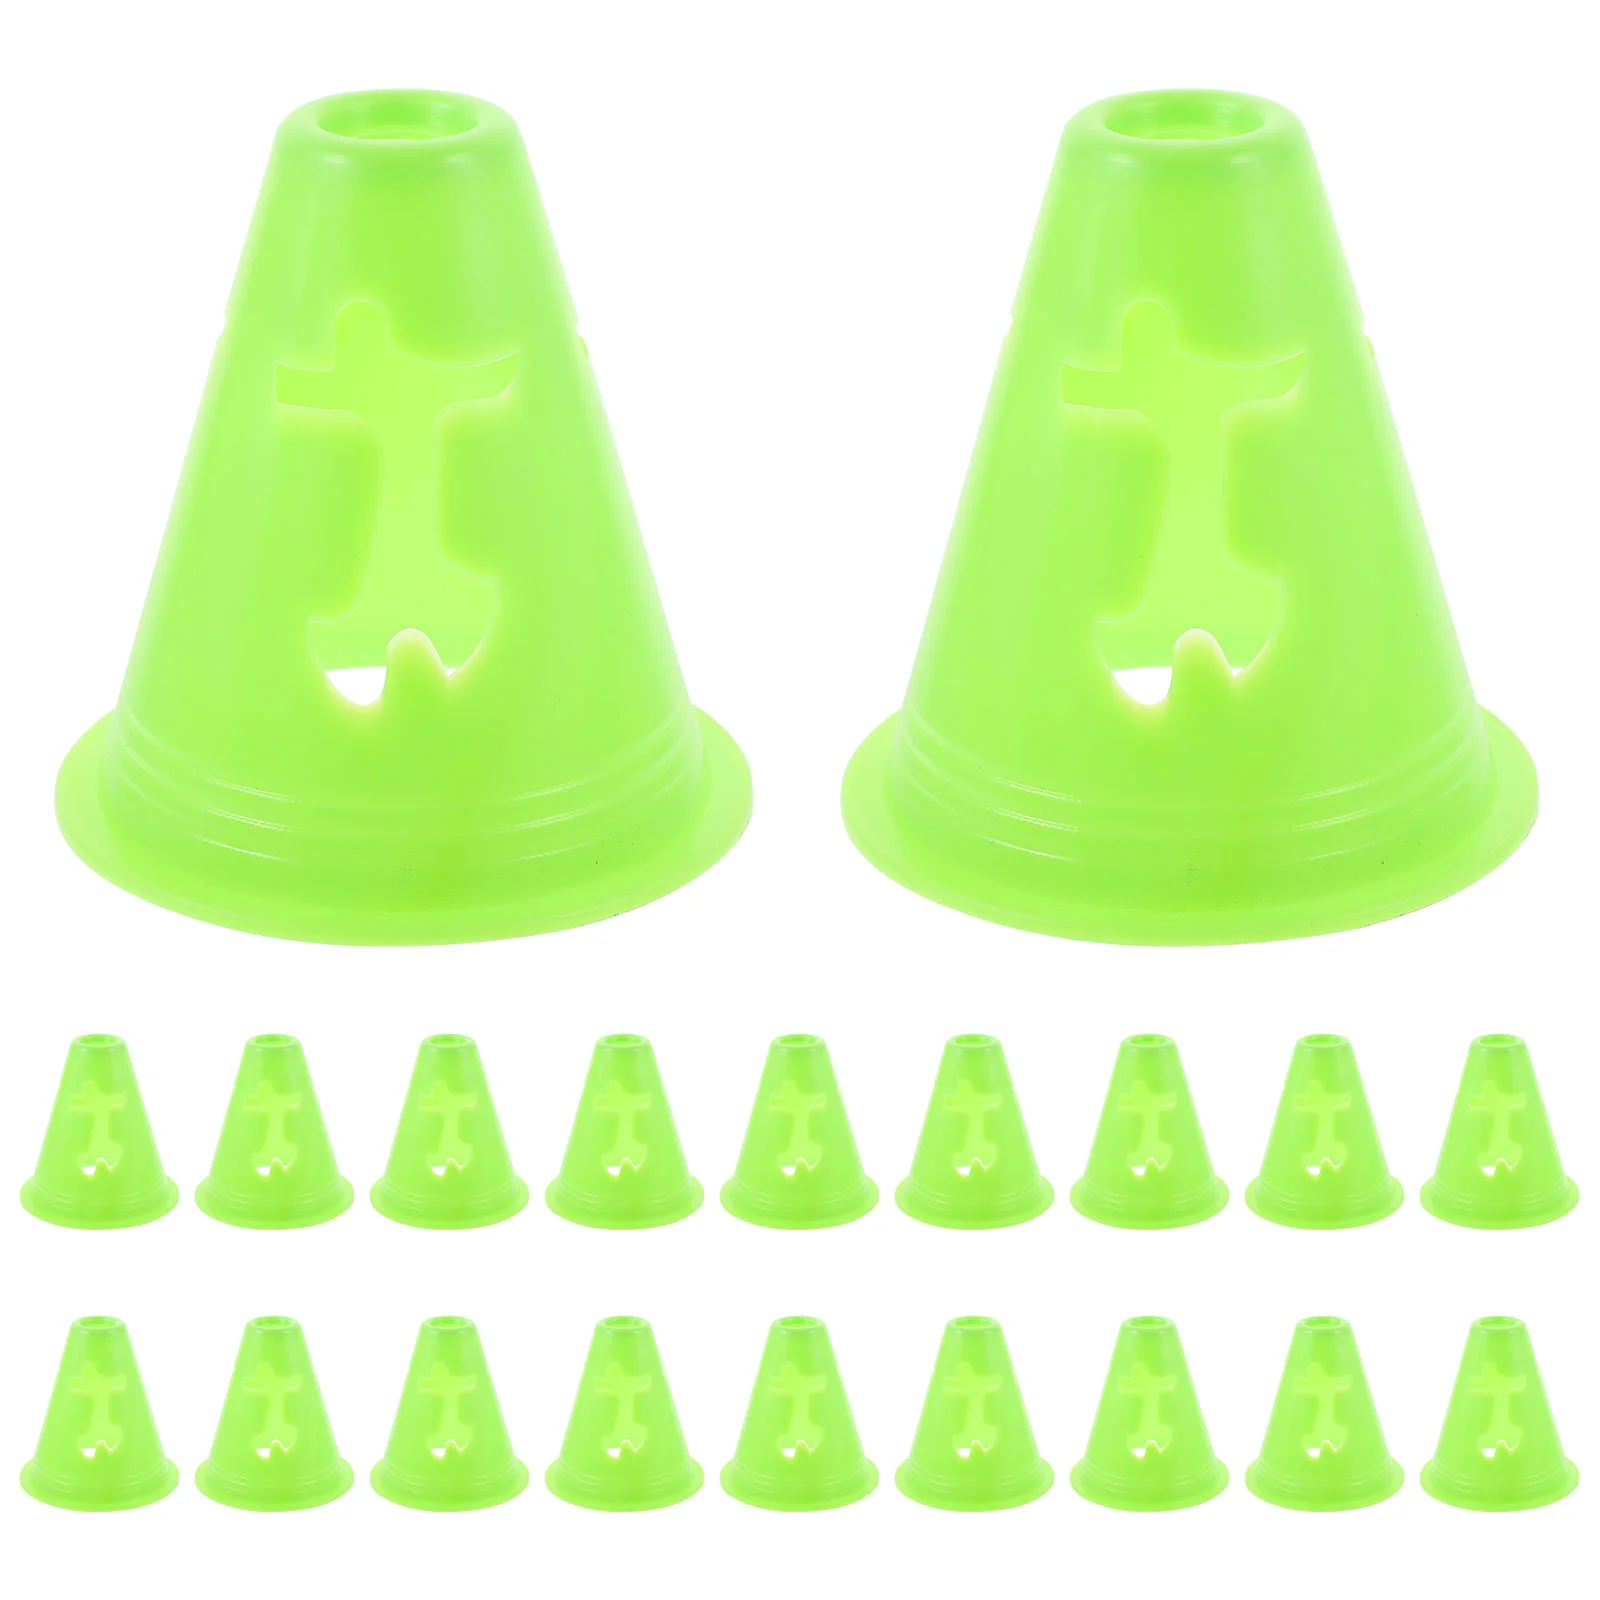 20 Pcs Cones Soccer Practice Mini Marking Cup Small Traffic Football Classroom Numbered